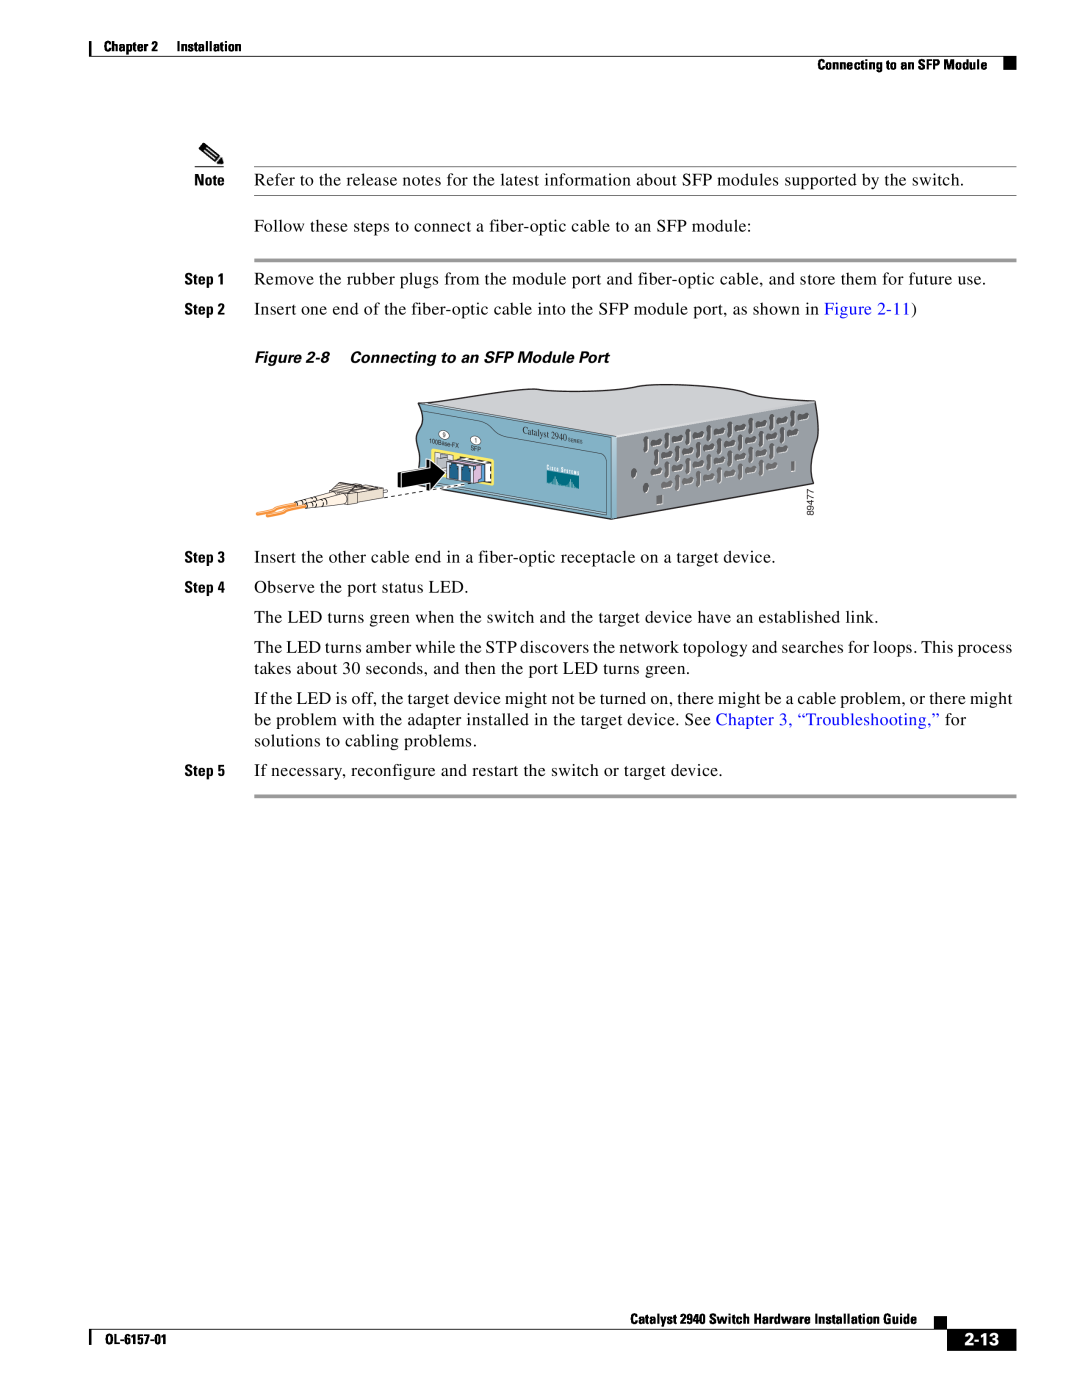 Cisco Systems OL-6157-01 manual 2-13, Follow these steps to connect a fiber-optic cable to an SFP module 